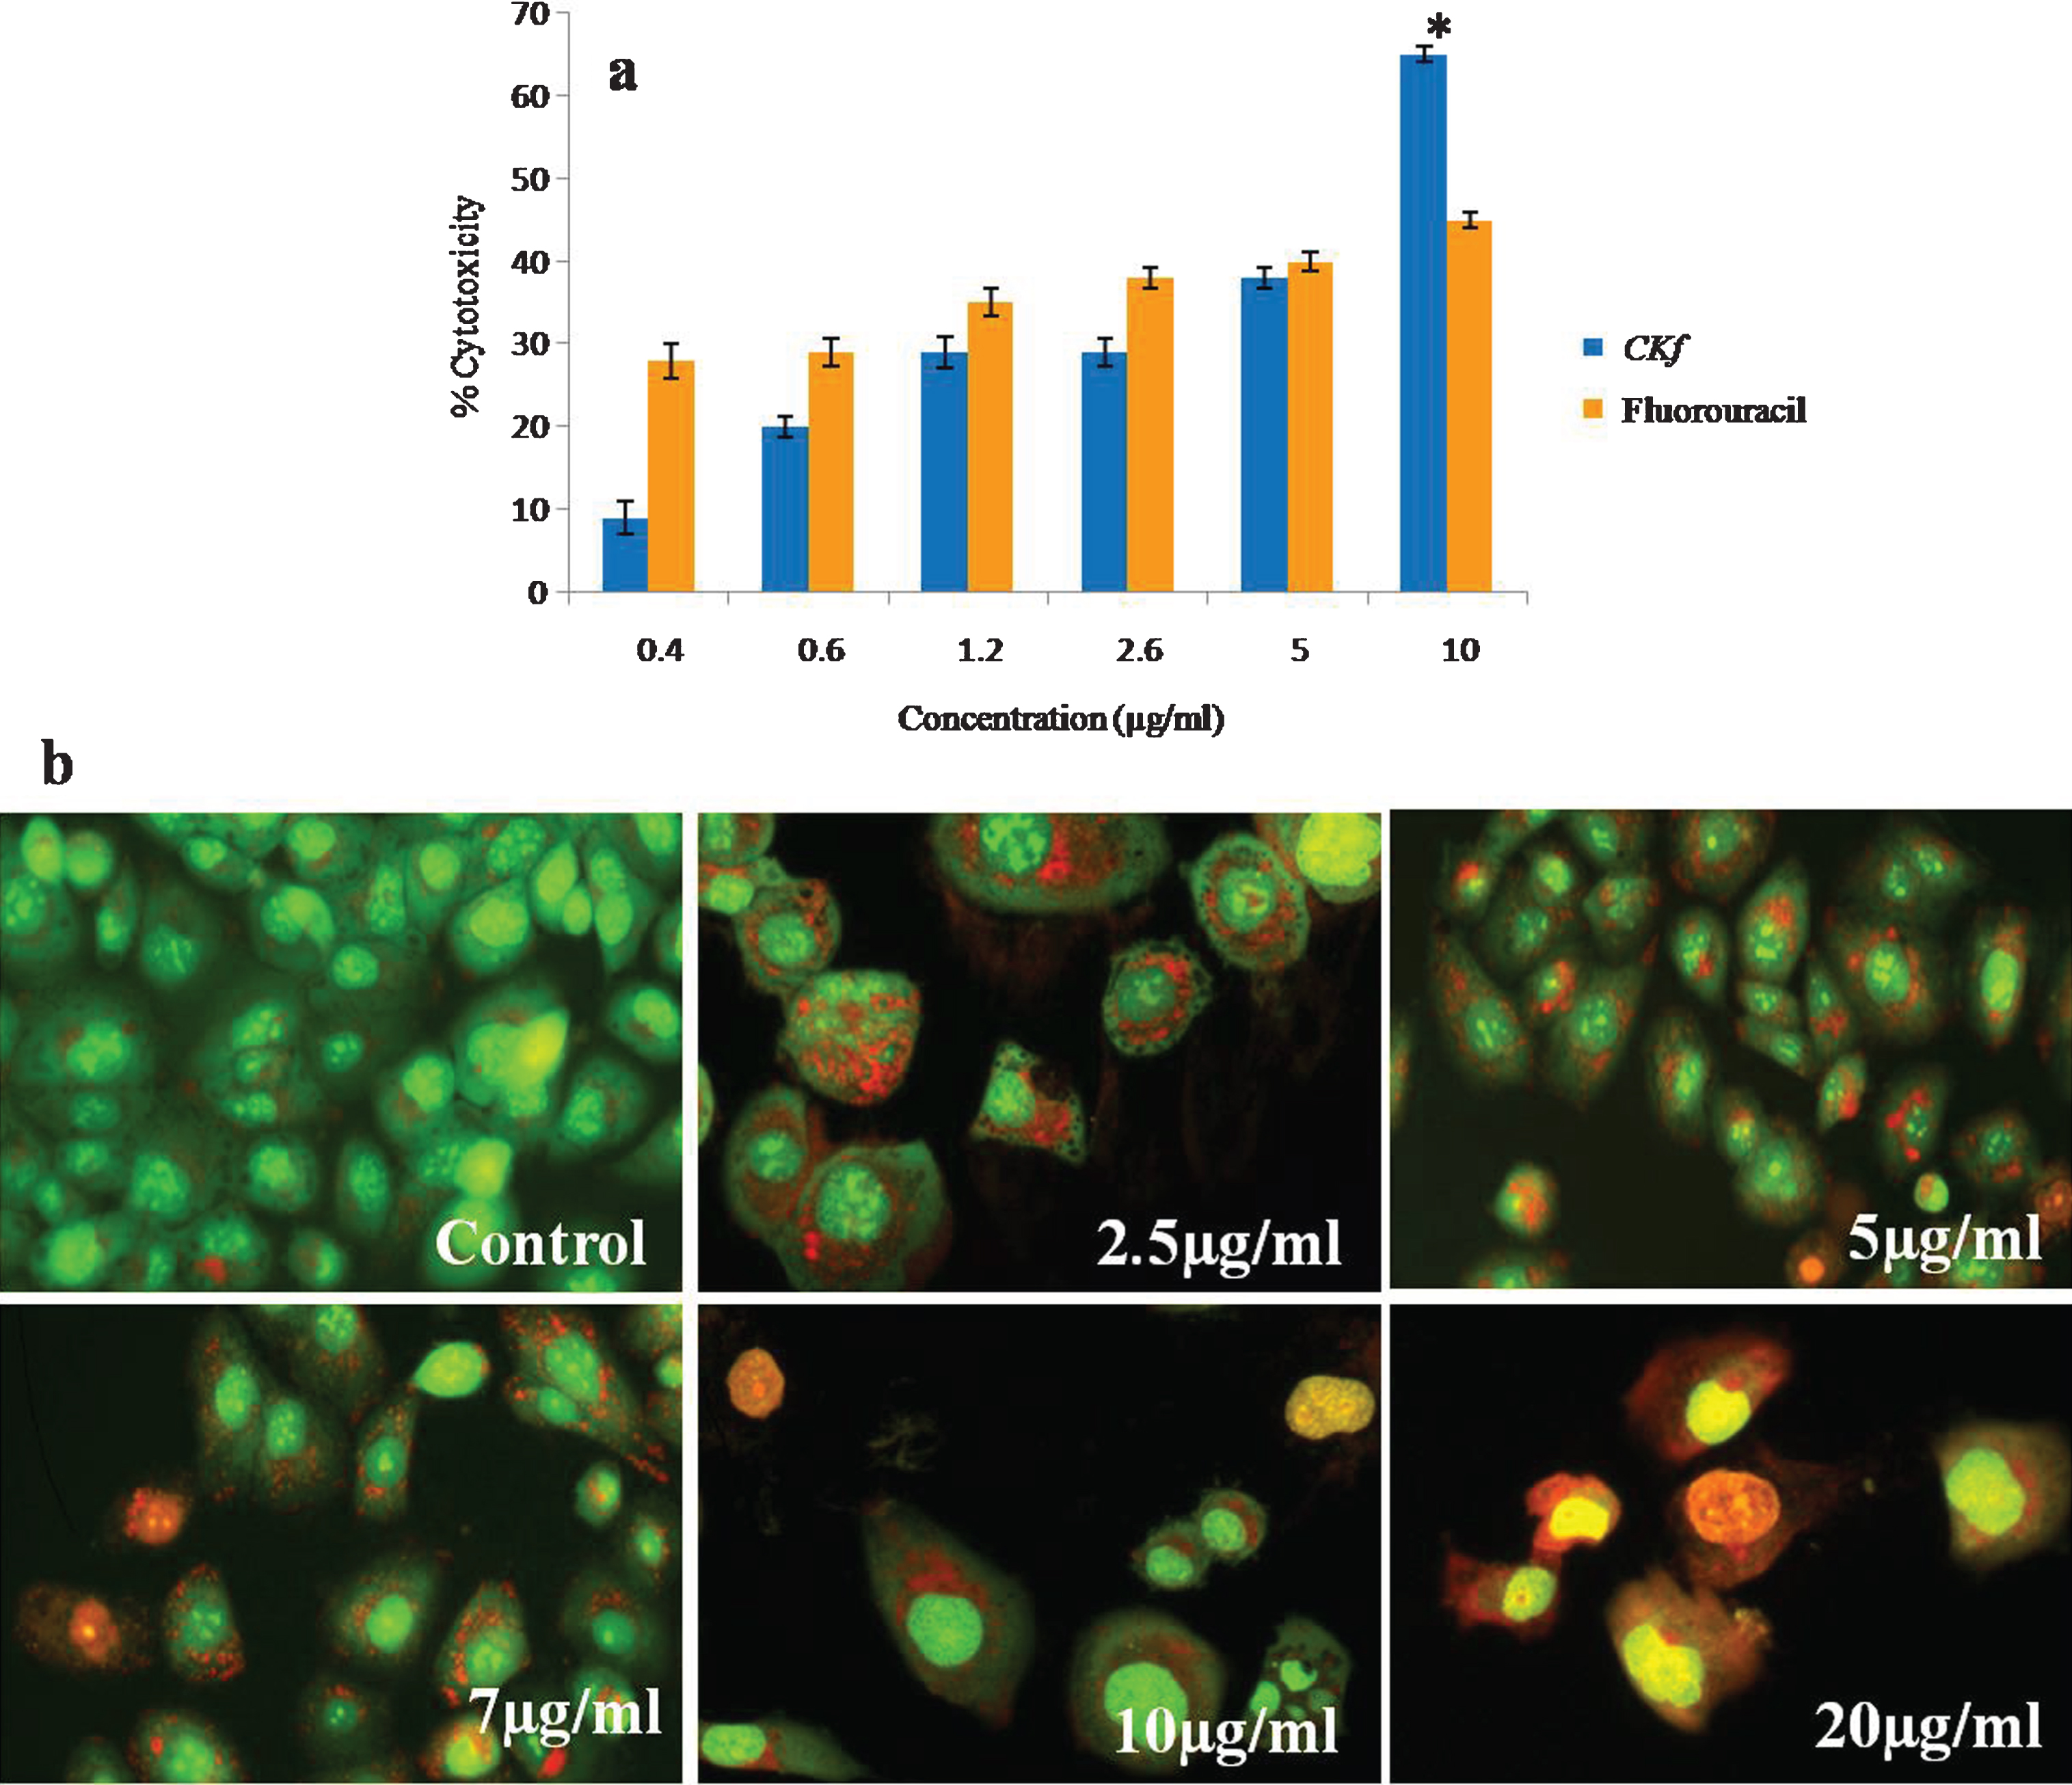 Cytotoxicy analysis of CKf on DU-145 cells. a) MTT assay; *statistically significant compared to the higher dose of fluorouracil (p < 0.05). b) Acridine orange ethidium bromide staining on DU-145 cells for evaluating apoptosis. Values are expressed as Mean±SD of three independent experiments.